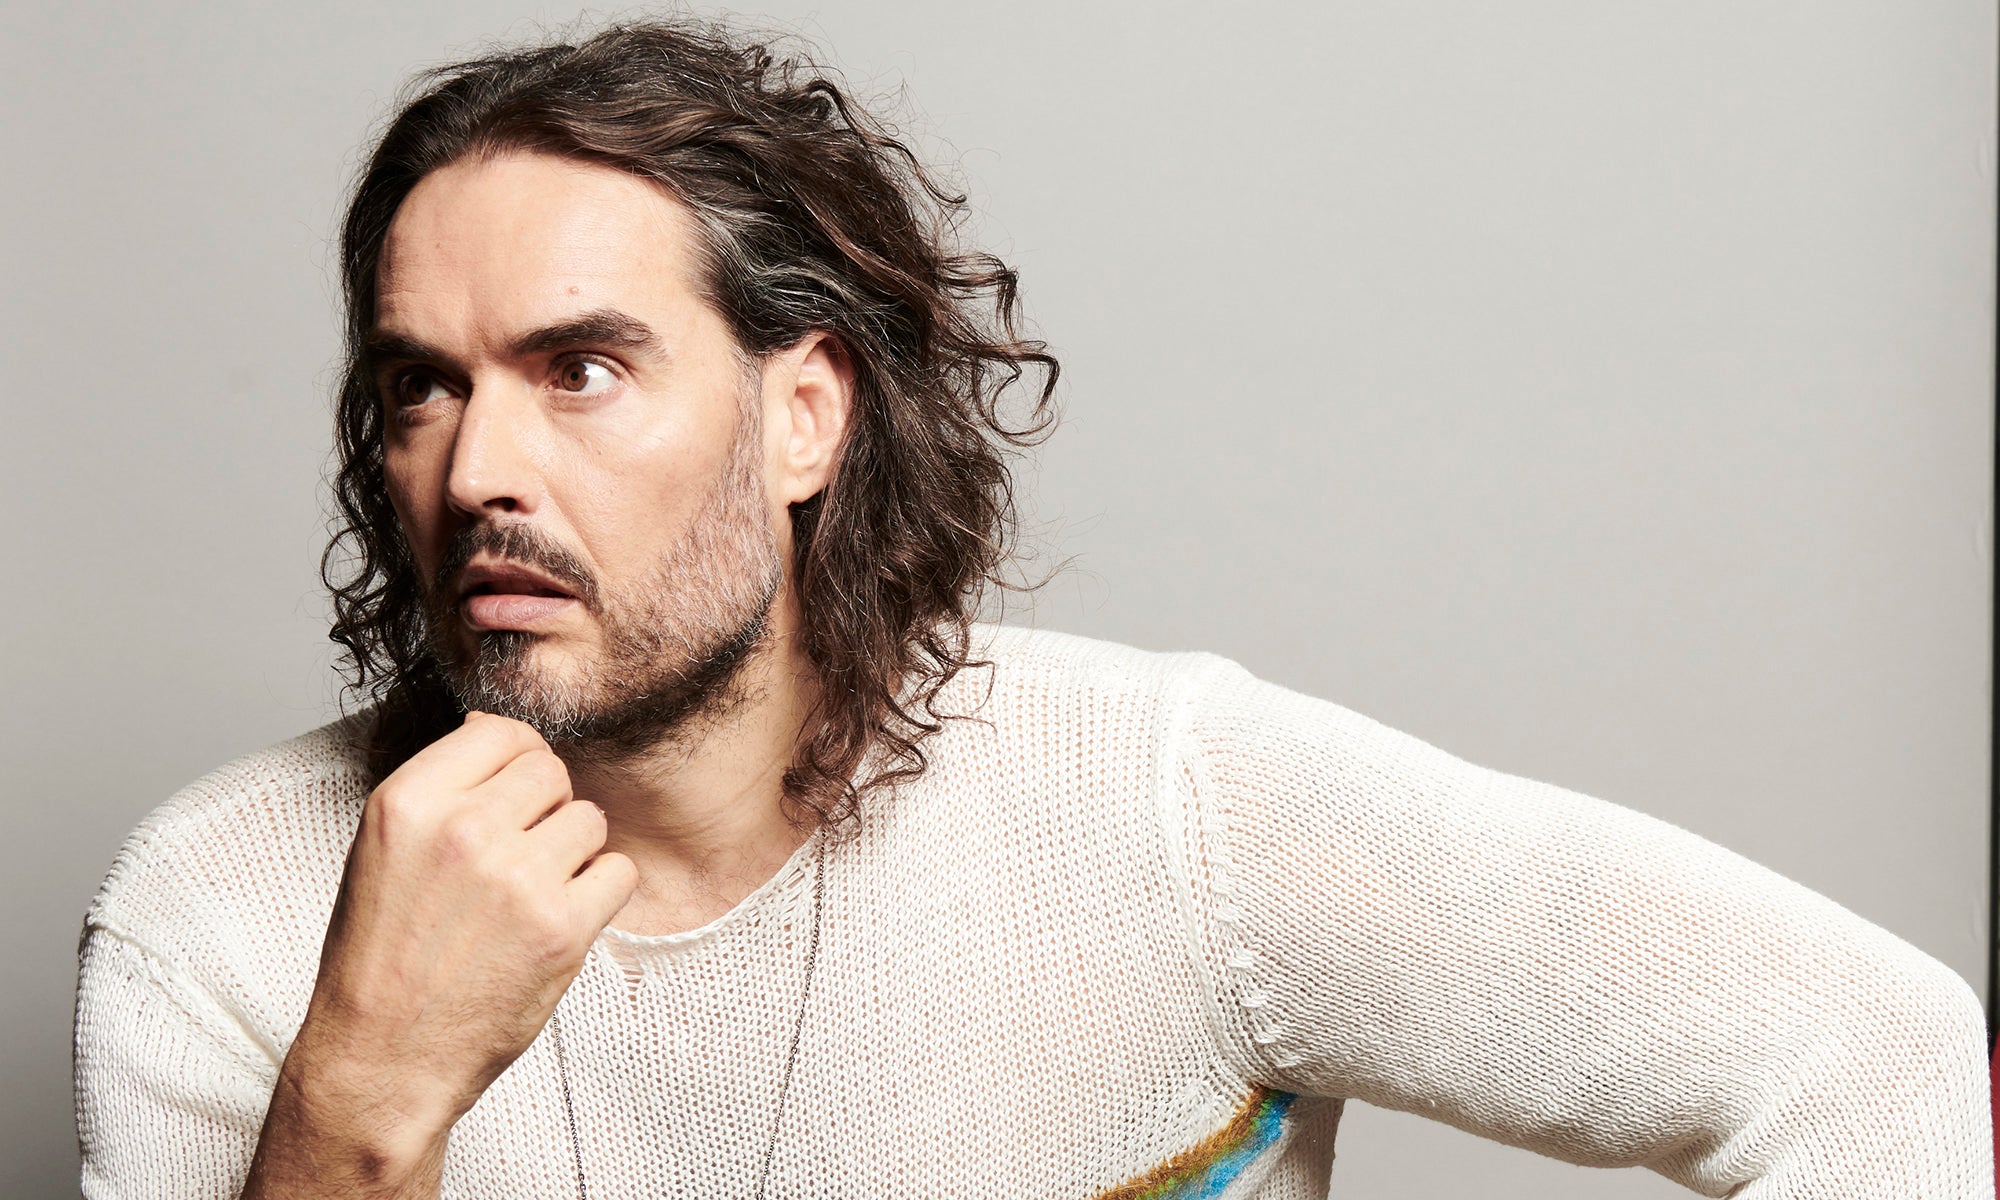 How To Get Russell Brand’s Haircuts And Hairstyles? - NO GUNK